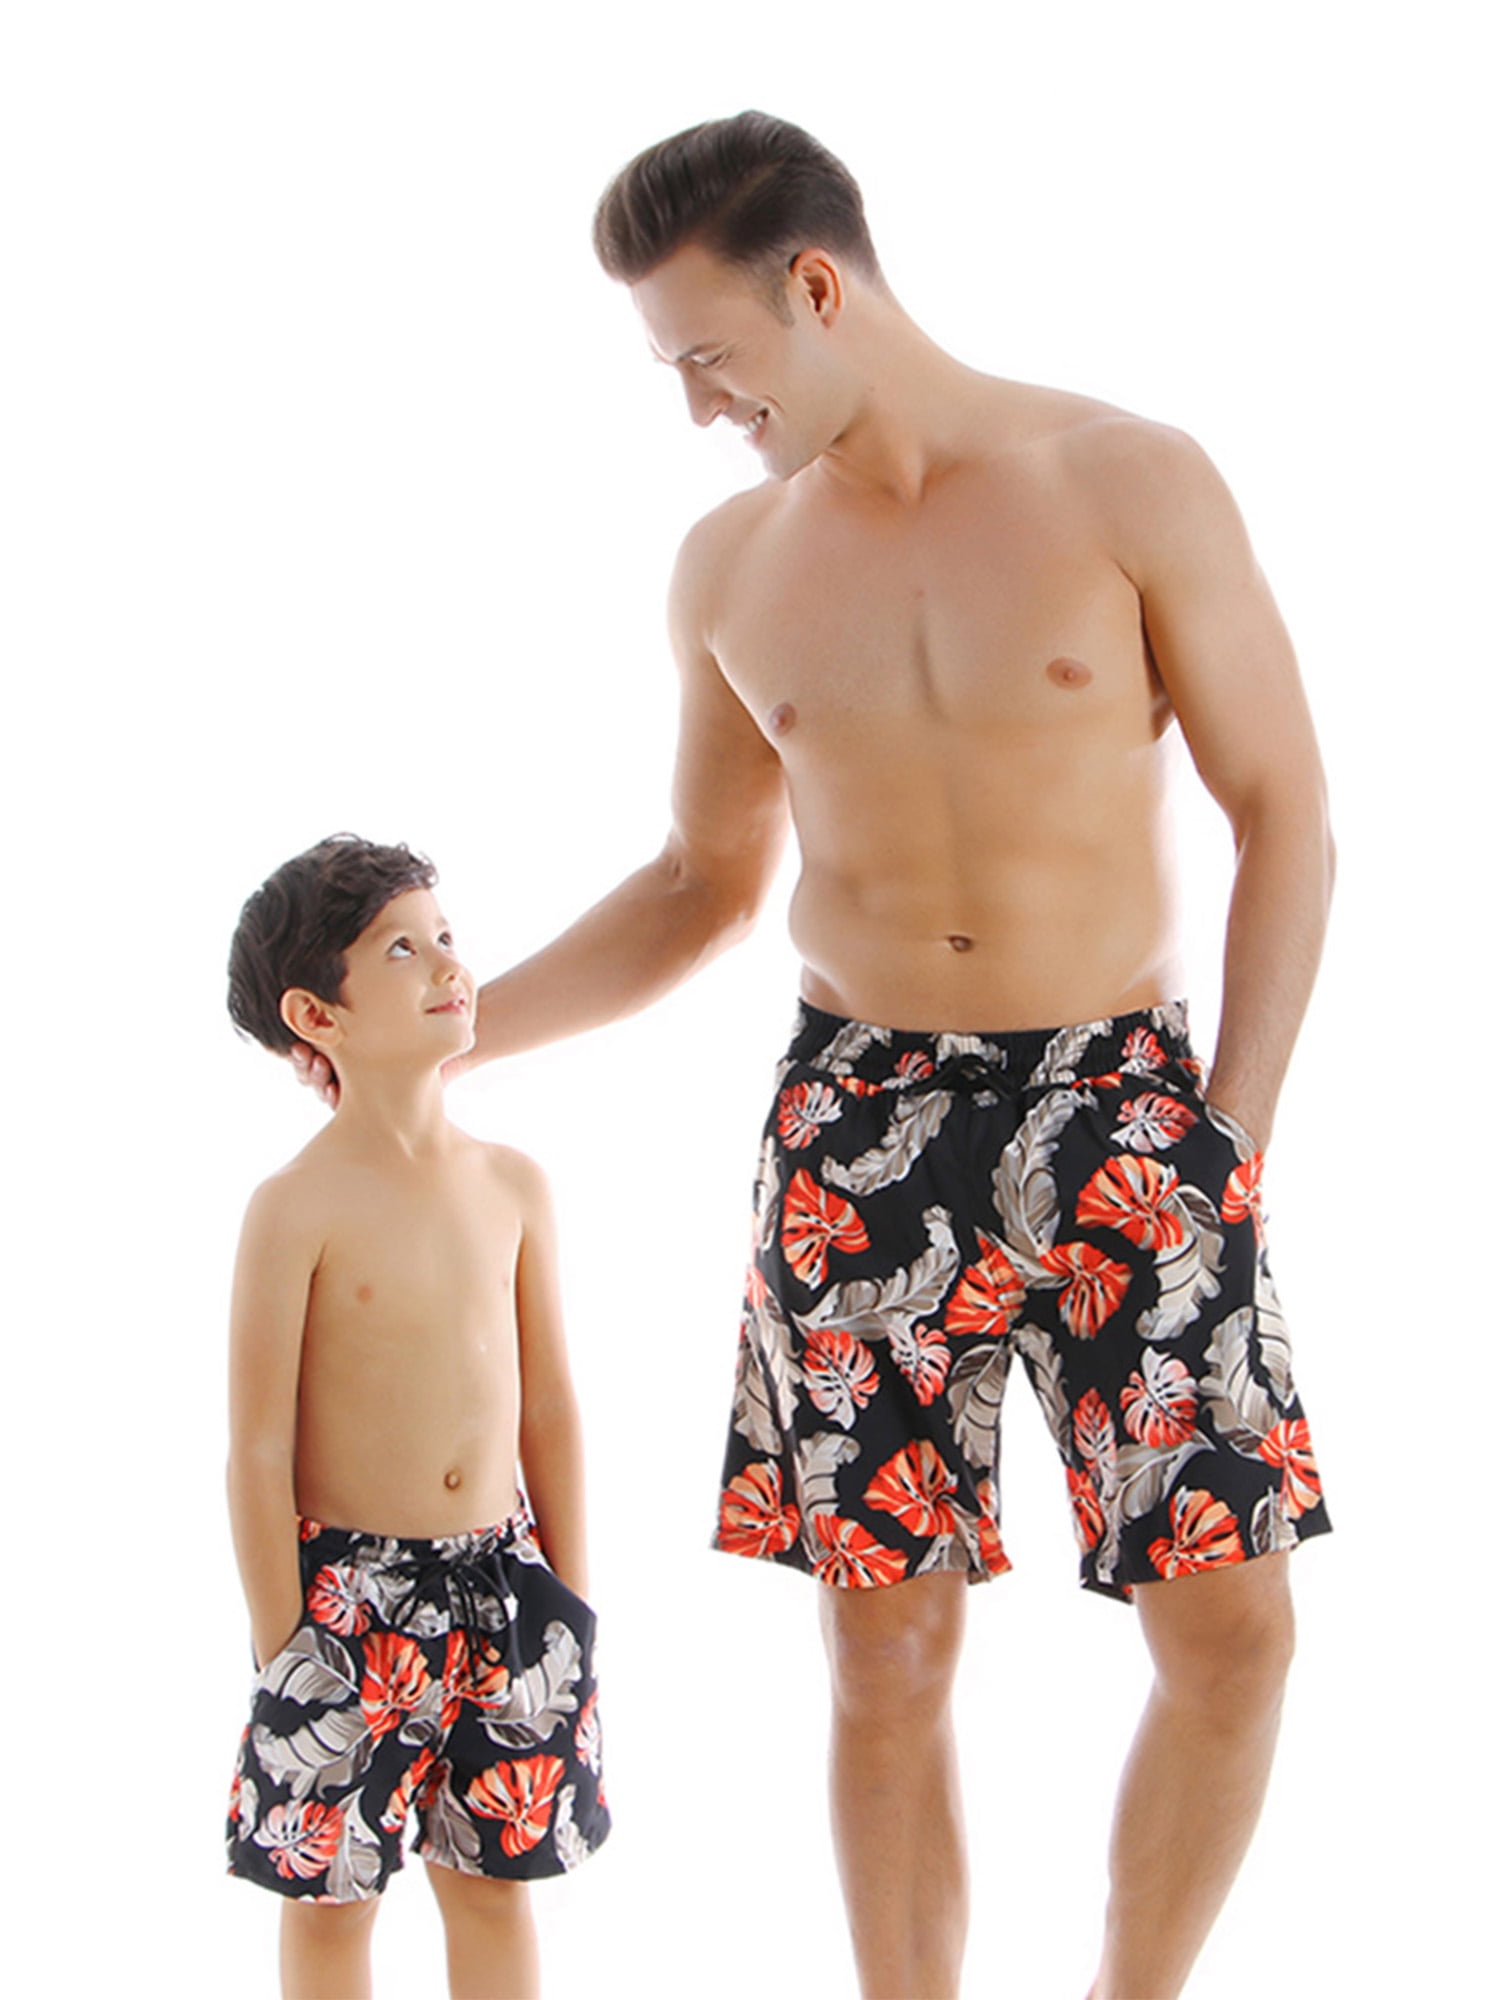 Papa Flag Mens Fashion Board/Beach Shorts Casual Classic Bathing Suit with Pockets